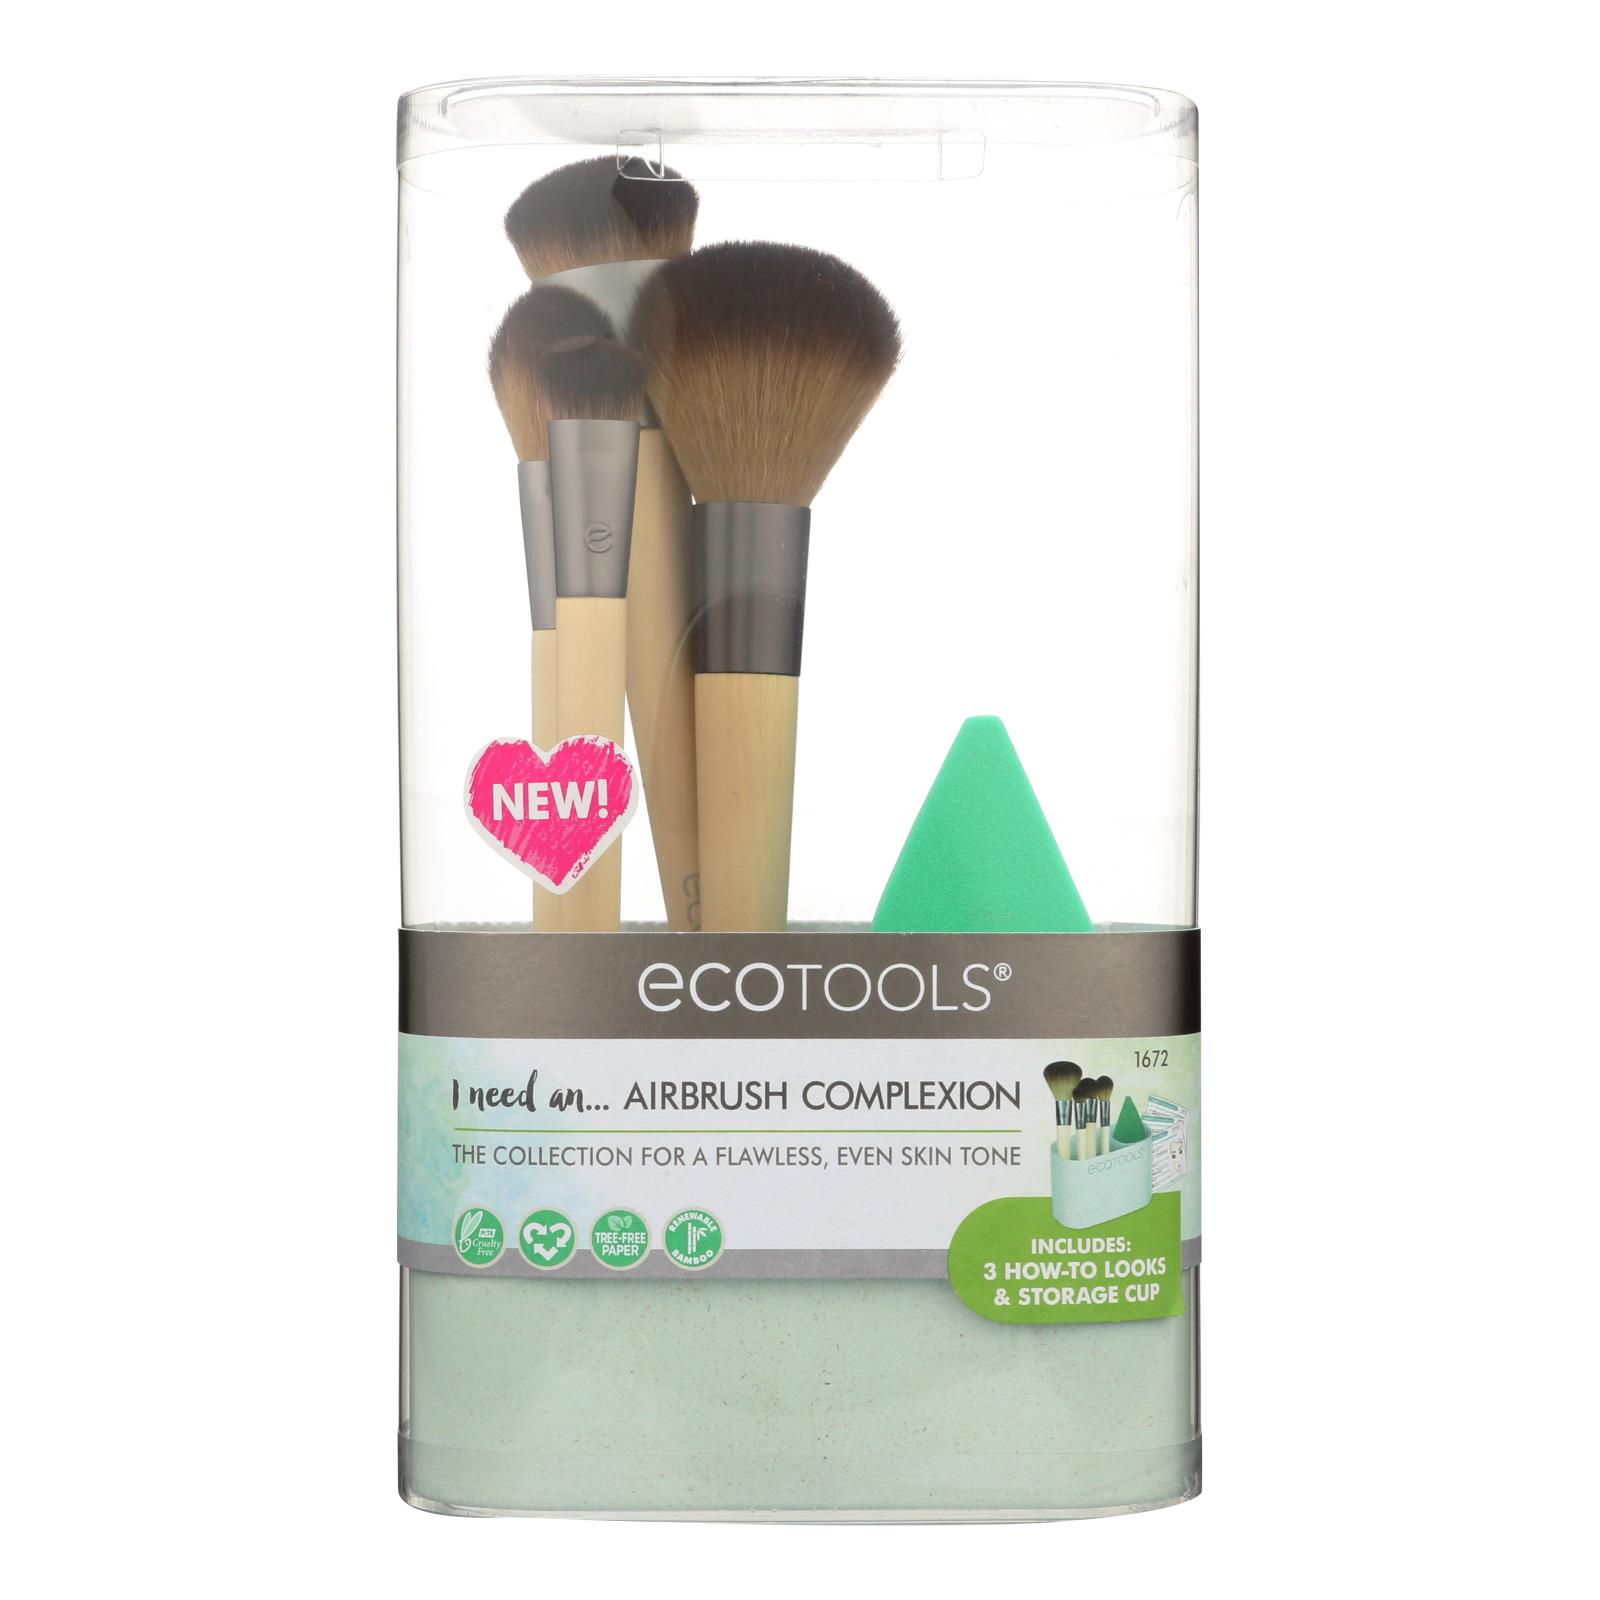 Ecotools Airbrush Complexion Kit - Case of 2 - CT